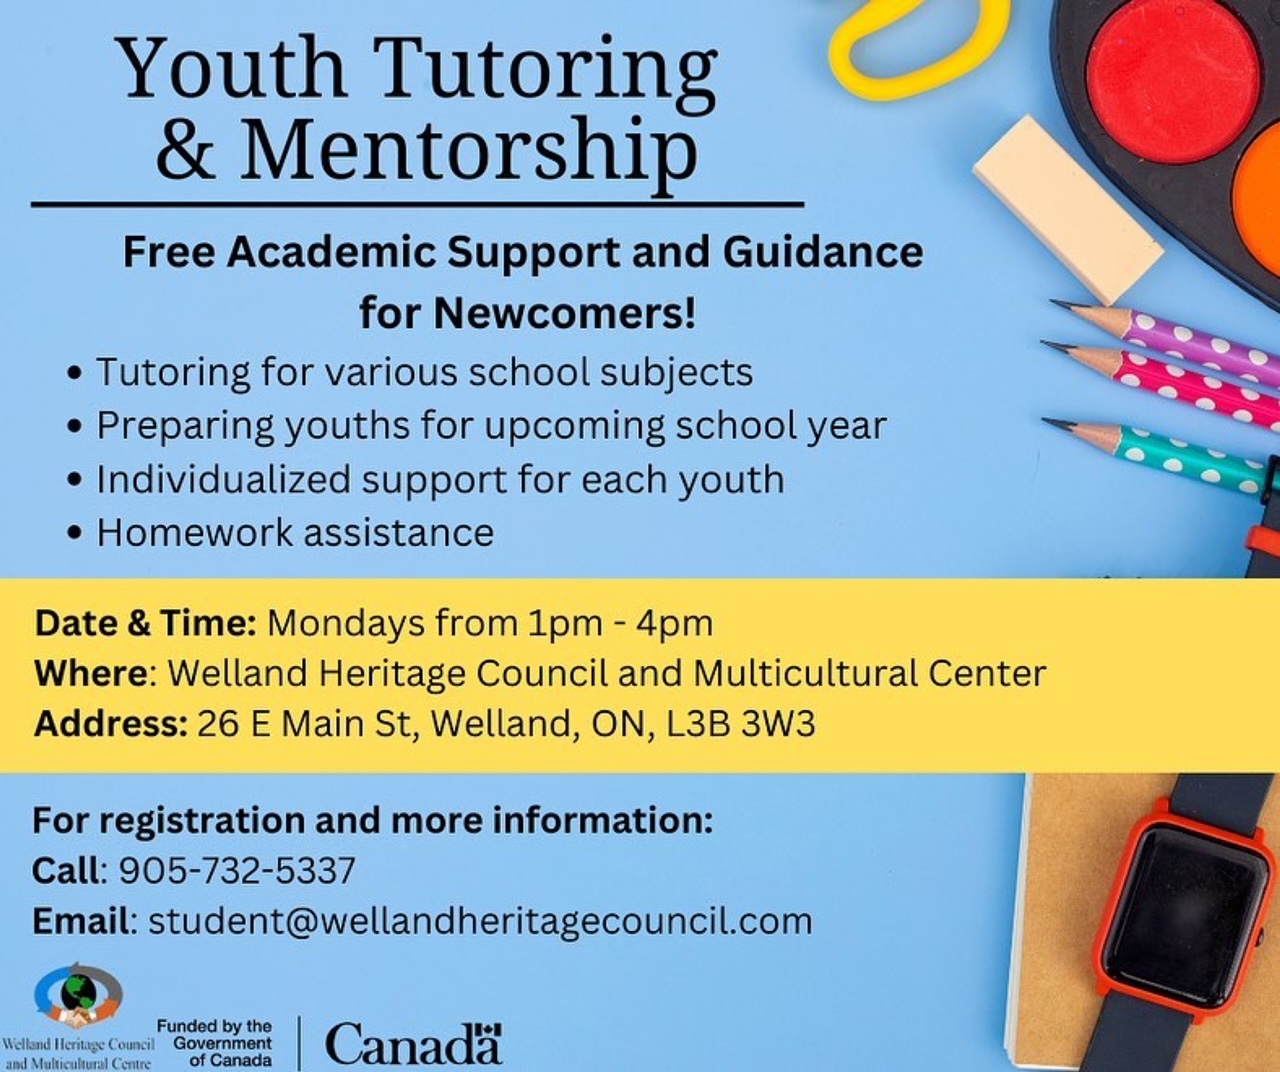 Register Now!  Welland Heritage Council Summer Youth Programs for Newcomers